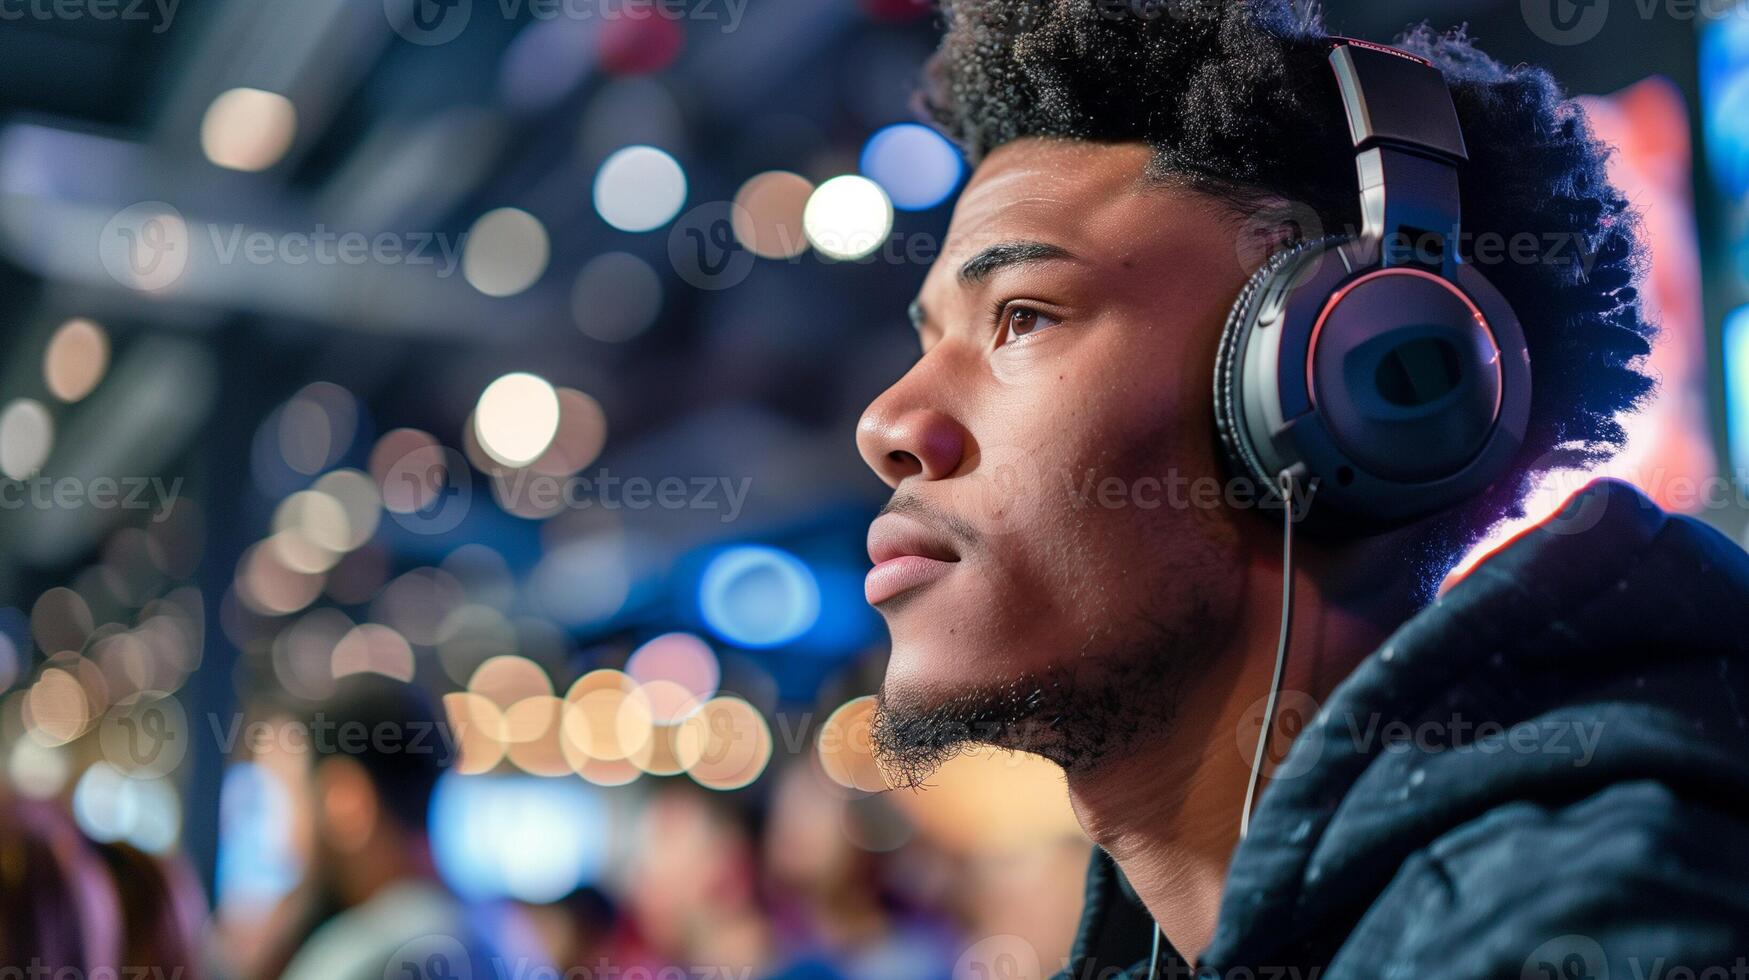 Young African American man wearing headphones, lost in thought amidst vibrant city lights, capturing modern lifestyle and technology ideal for World Music Day photo